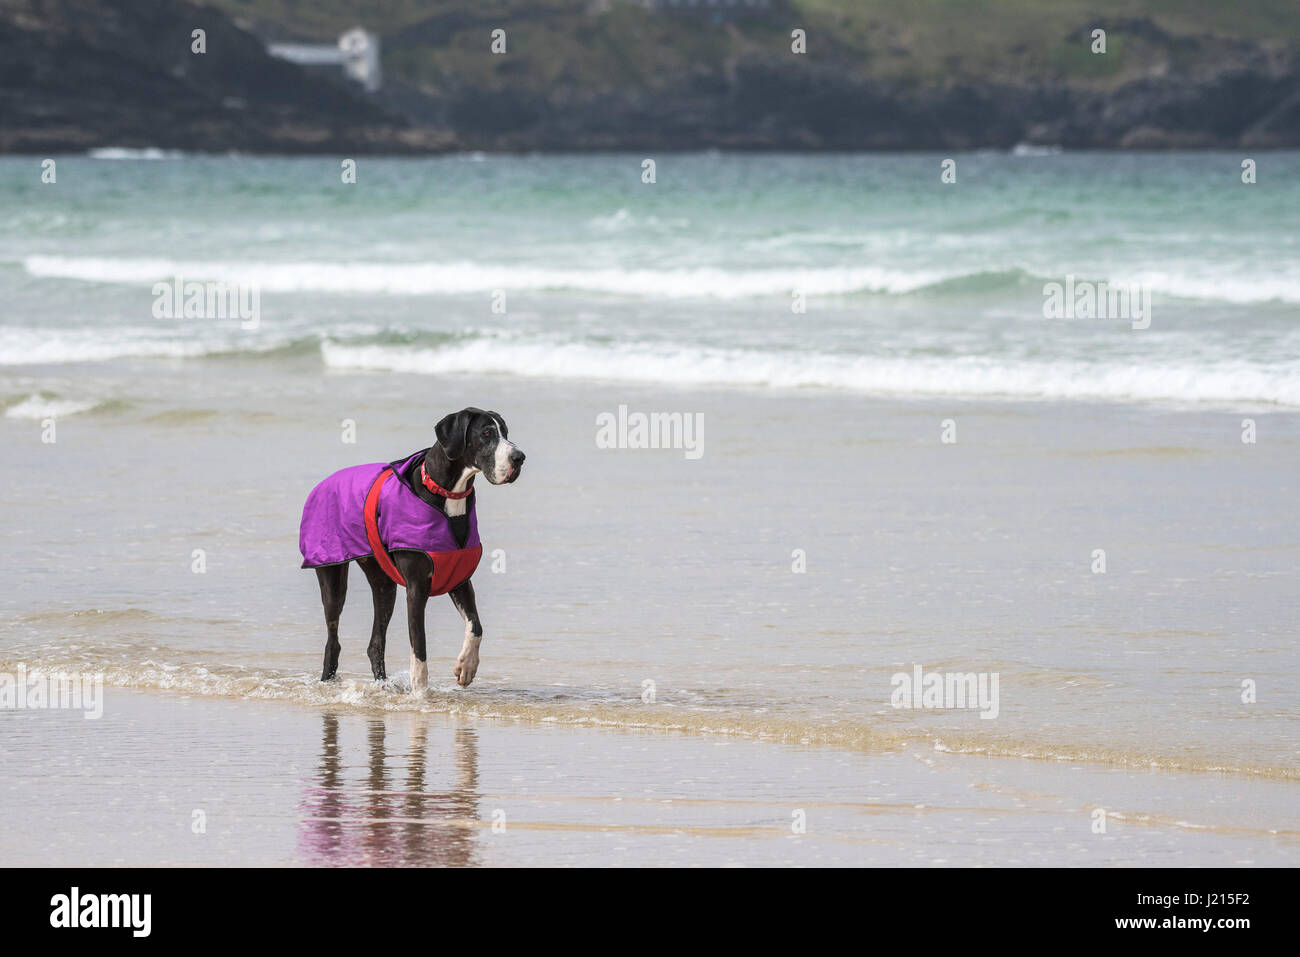 A Great Dane dog walking along the shoreline on Fistral beach in Newquay, Cornwall. Stock Photo